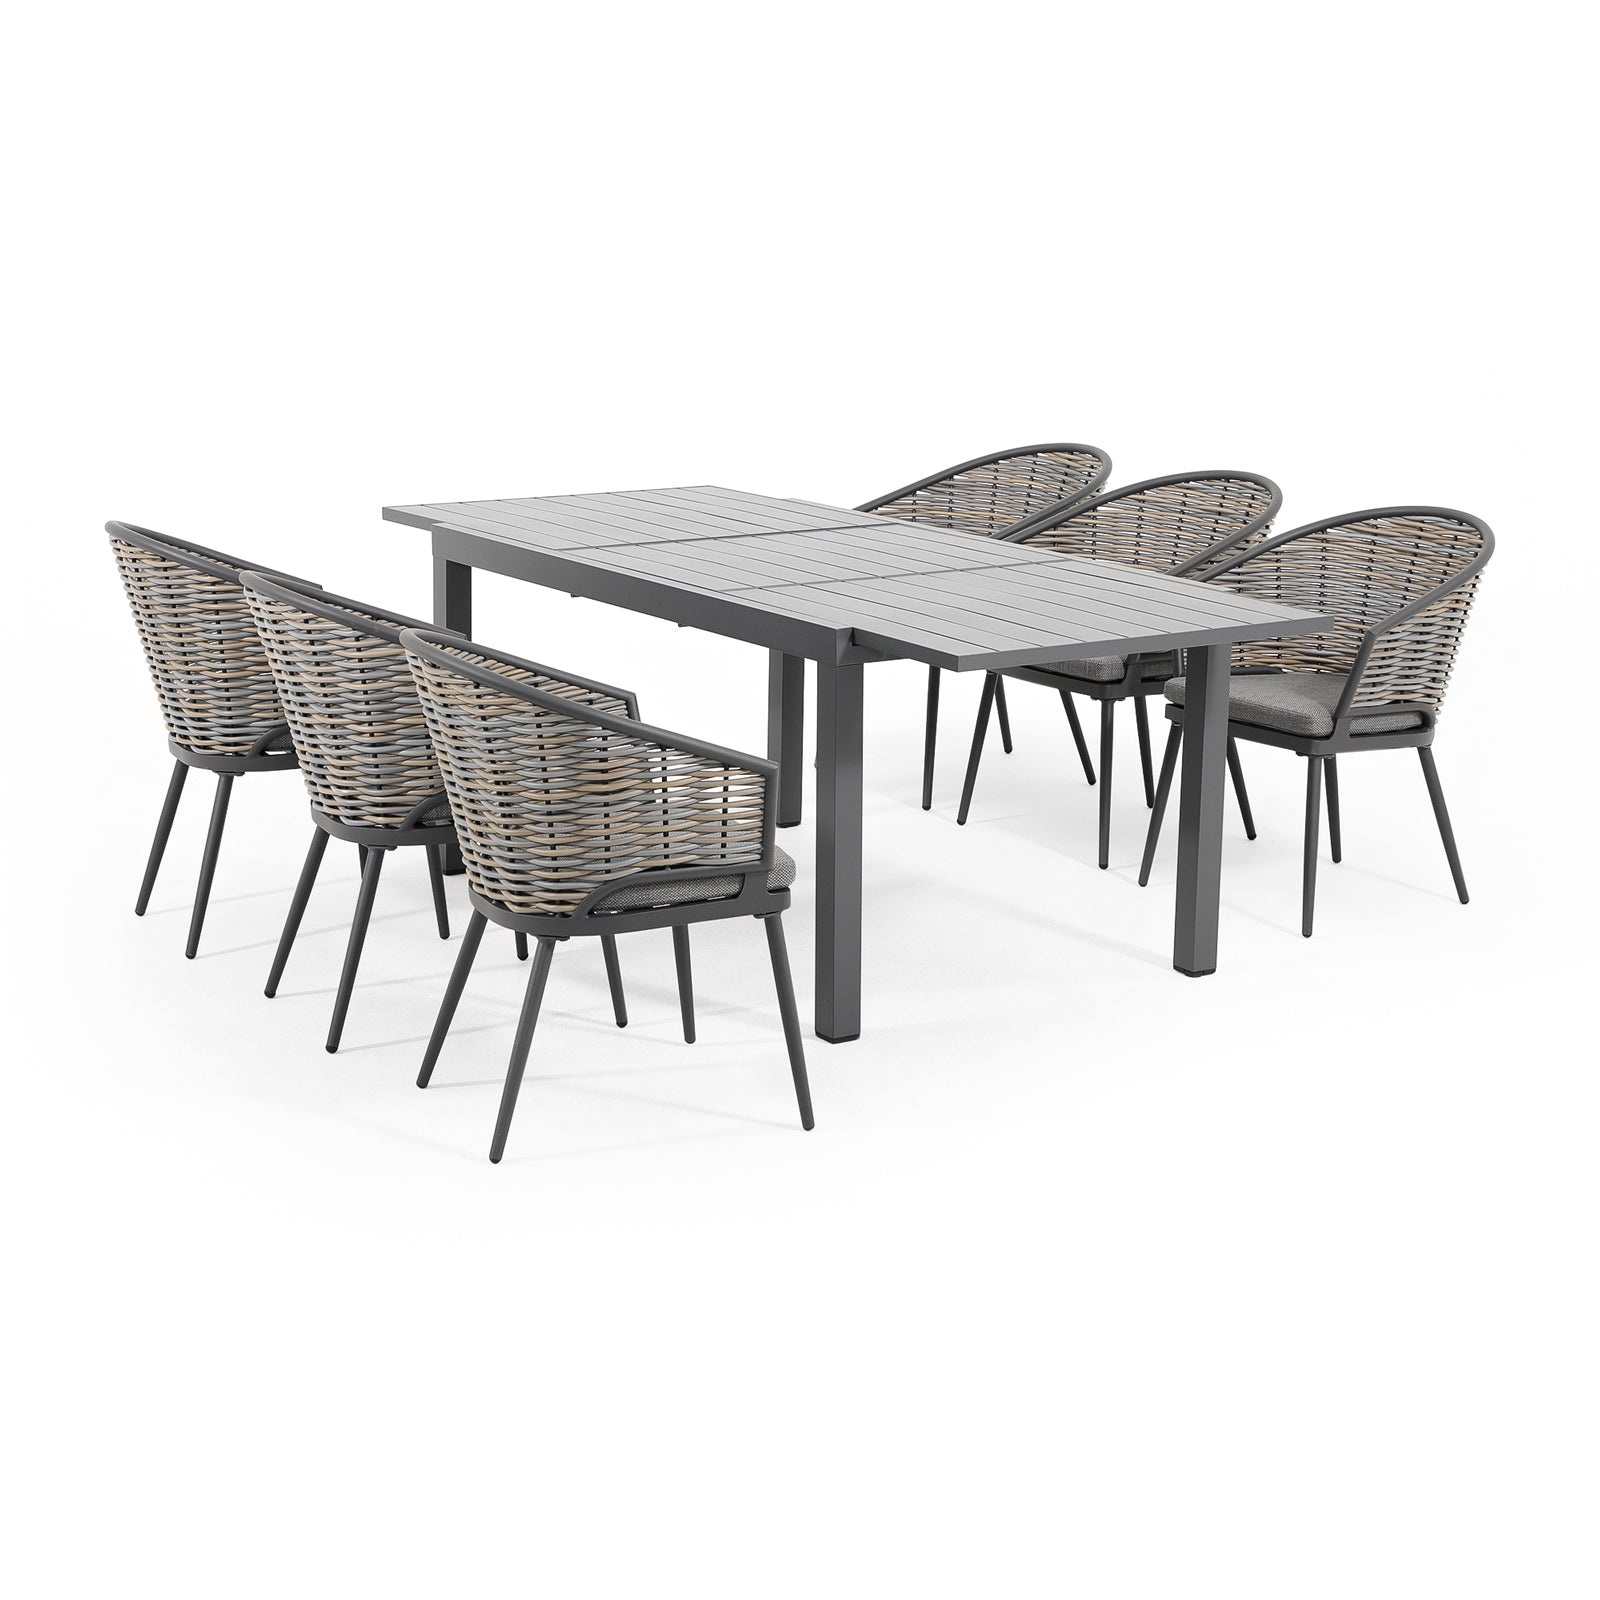 Burano Grey wicker outdoor Dining Set with aluminum frame, 6 chairs with grey cushions, 1 aluminum extendable rectangle dining Table, white background - Jardina Furniture#Piece_7-pc.